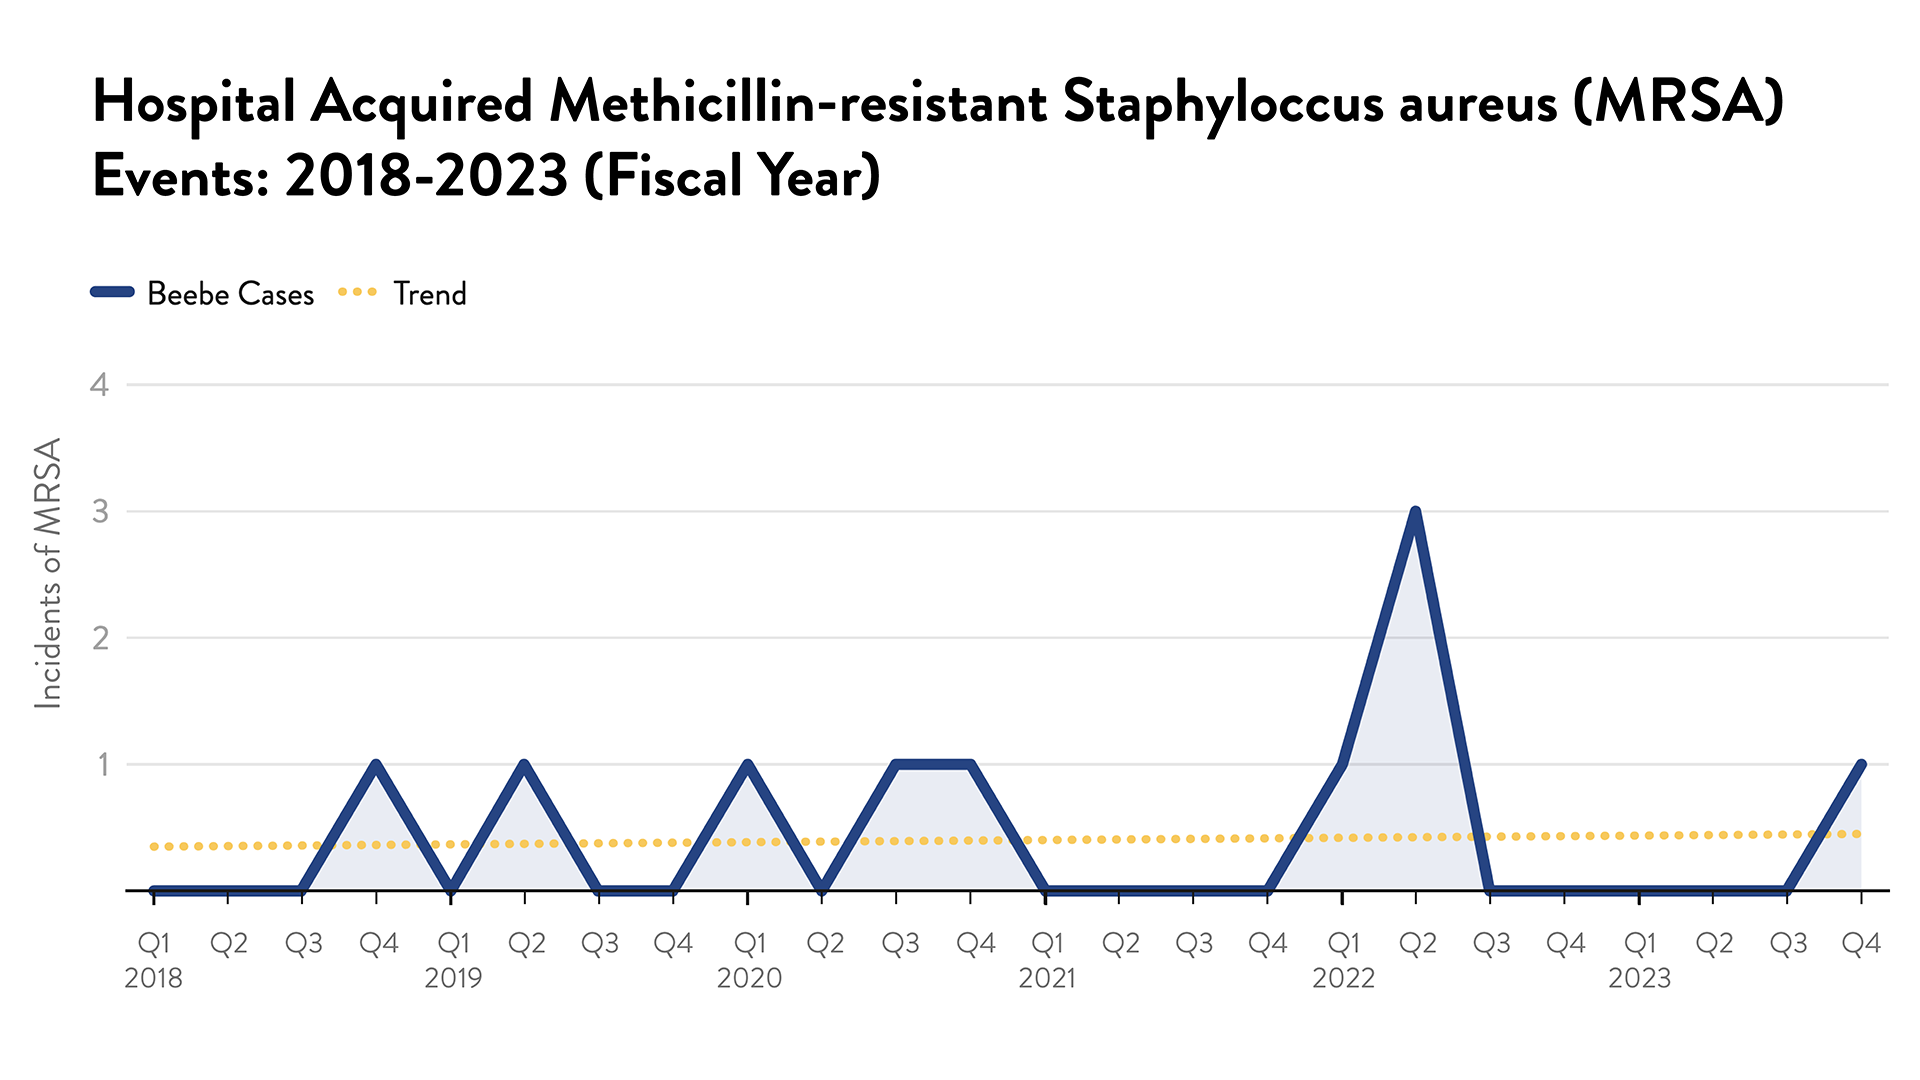 Hospital Acquired Methicillin-resistant Staphyloccus aureus (MRSA) Events: 2018-2023 (Fiscal Year)